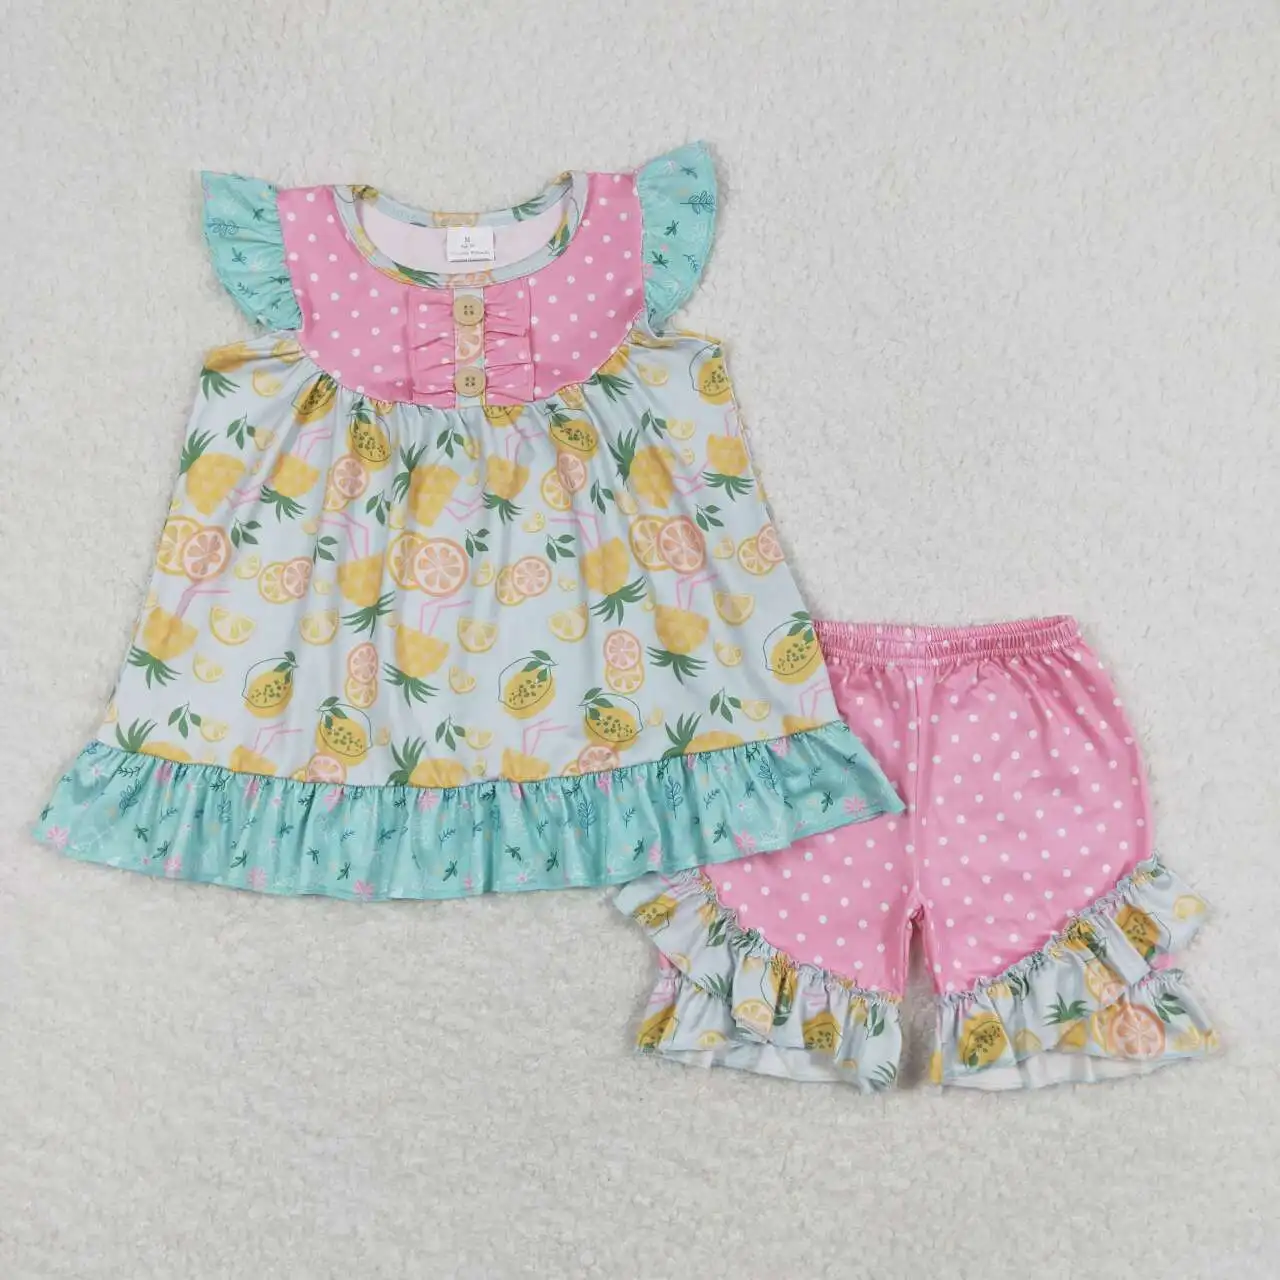 

Baby Girls orange juice outfits summer clothing Toddlers wholesale boutique Baby Short Sleeves Top Shorts Kids new arrival sets